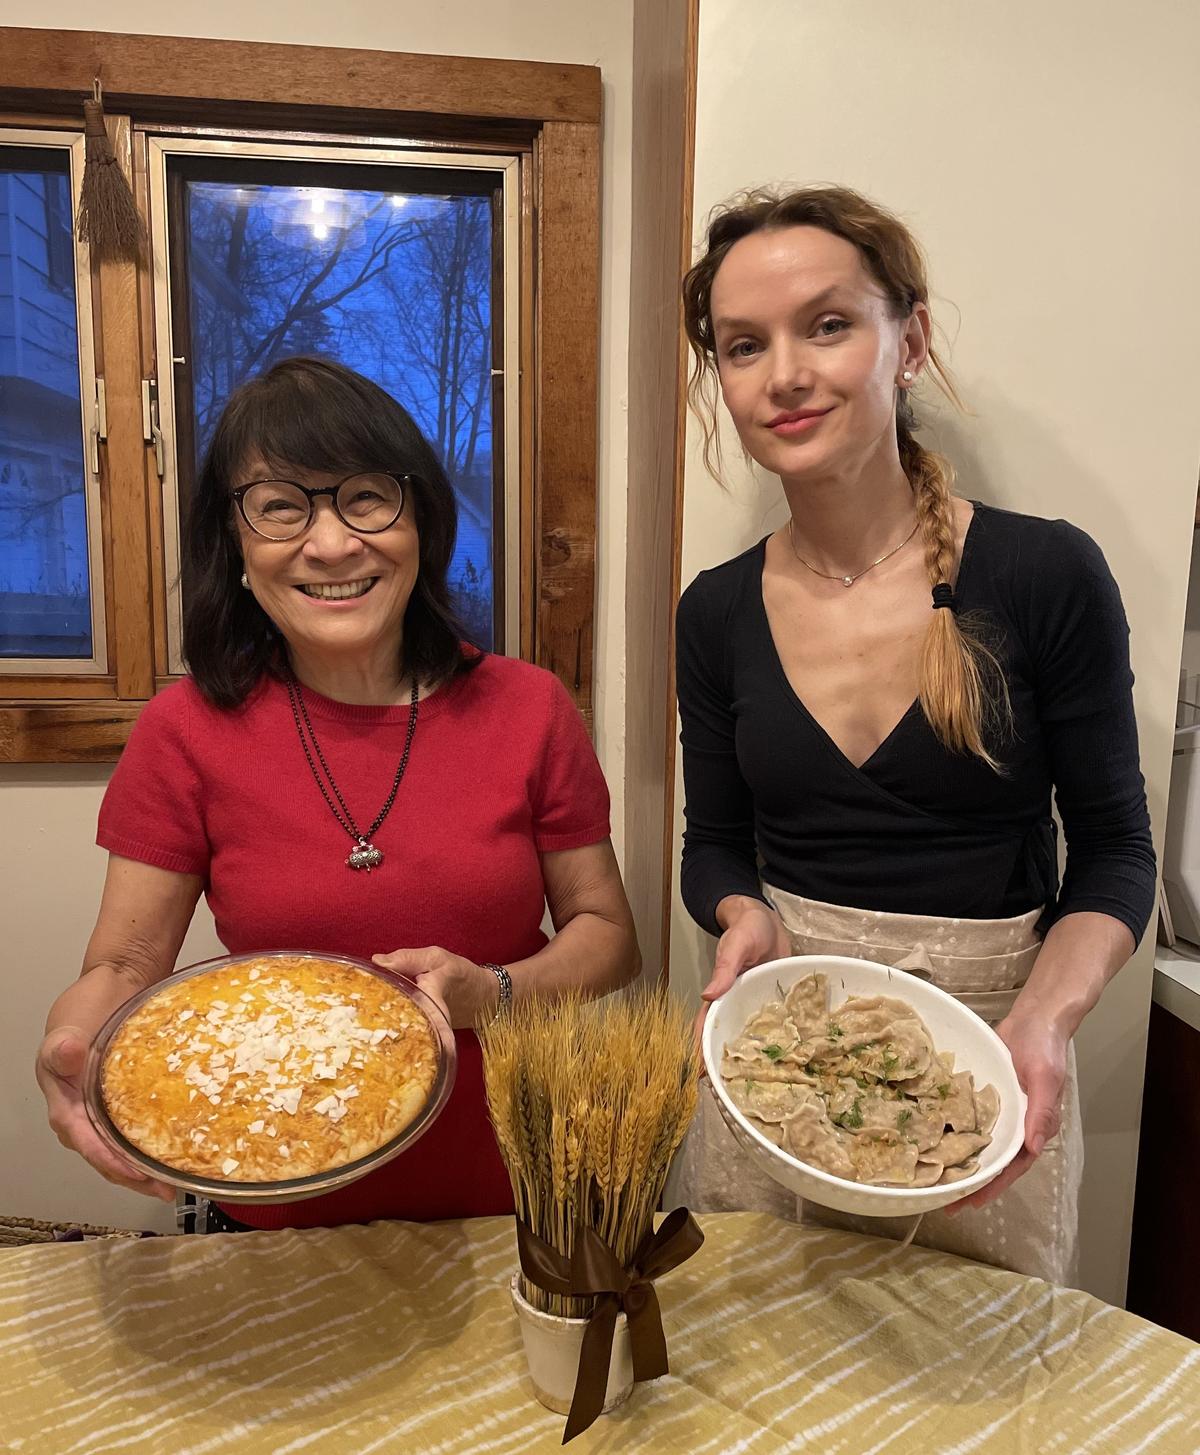 The author (L) and her neighbor Oleksandra showcase their bibingka and varenyky dishes. (Courtesy of Cherry Dumaual)